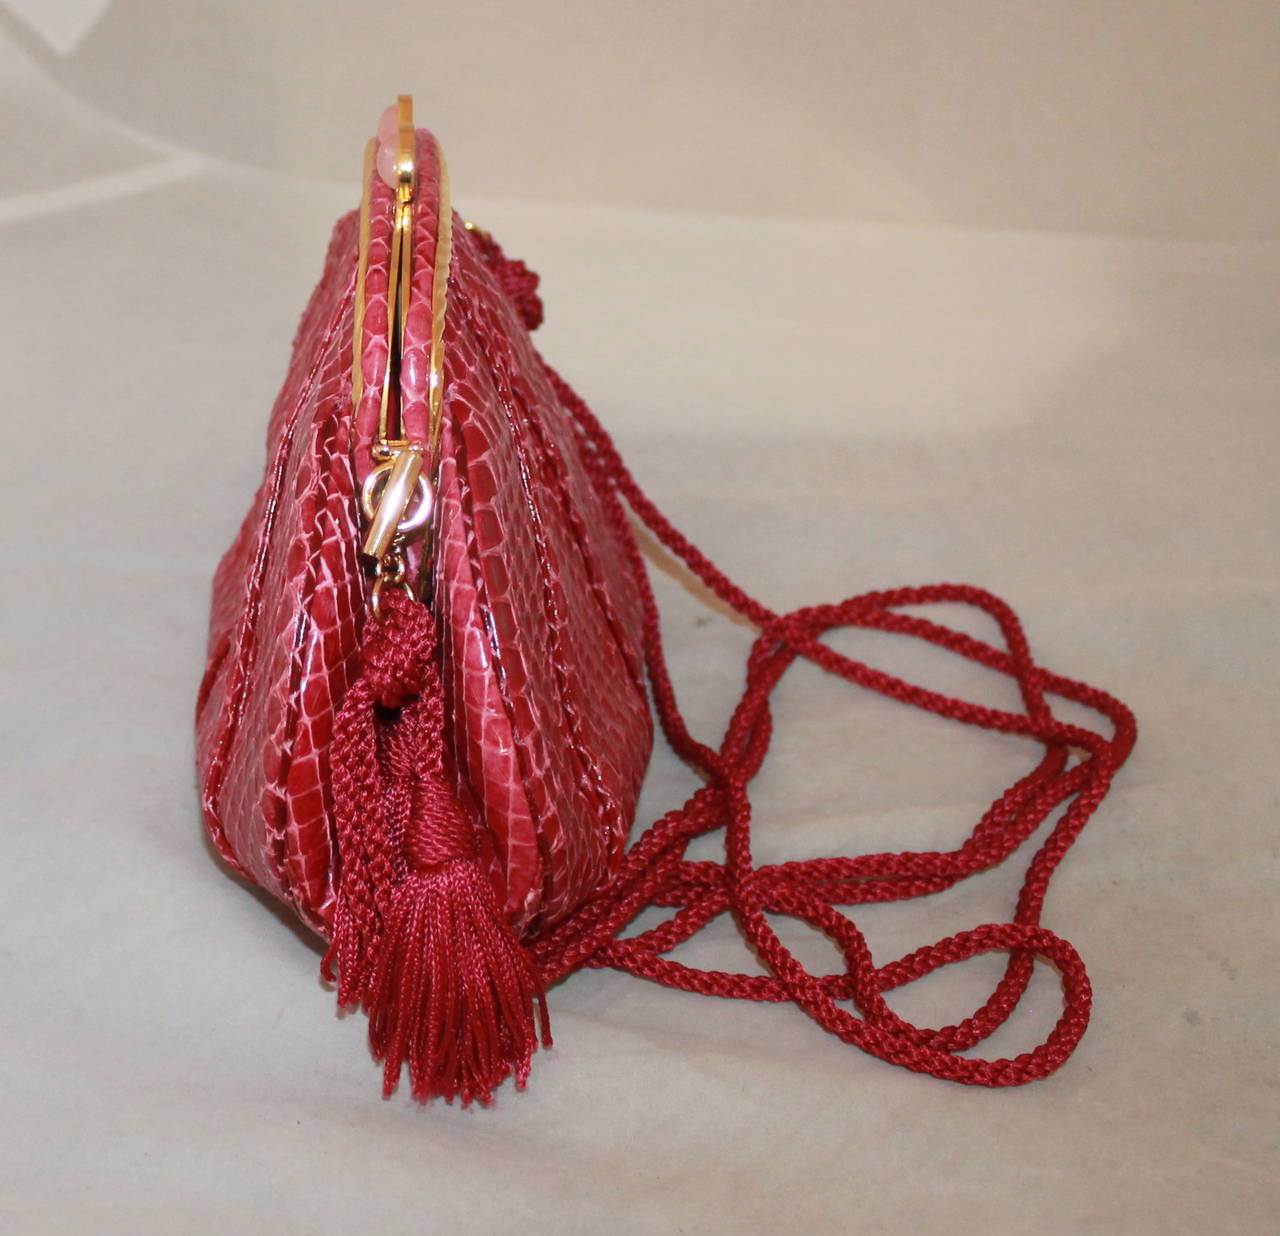 Judith Leiber Vintage Rasberry Snakeskin Evening Bag with Rope Handle. This bag is in excellent condition with the duster, coin purse, comb, and cards. 

Measurements:
Length- 5